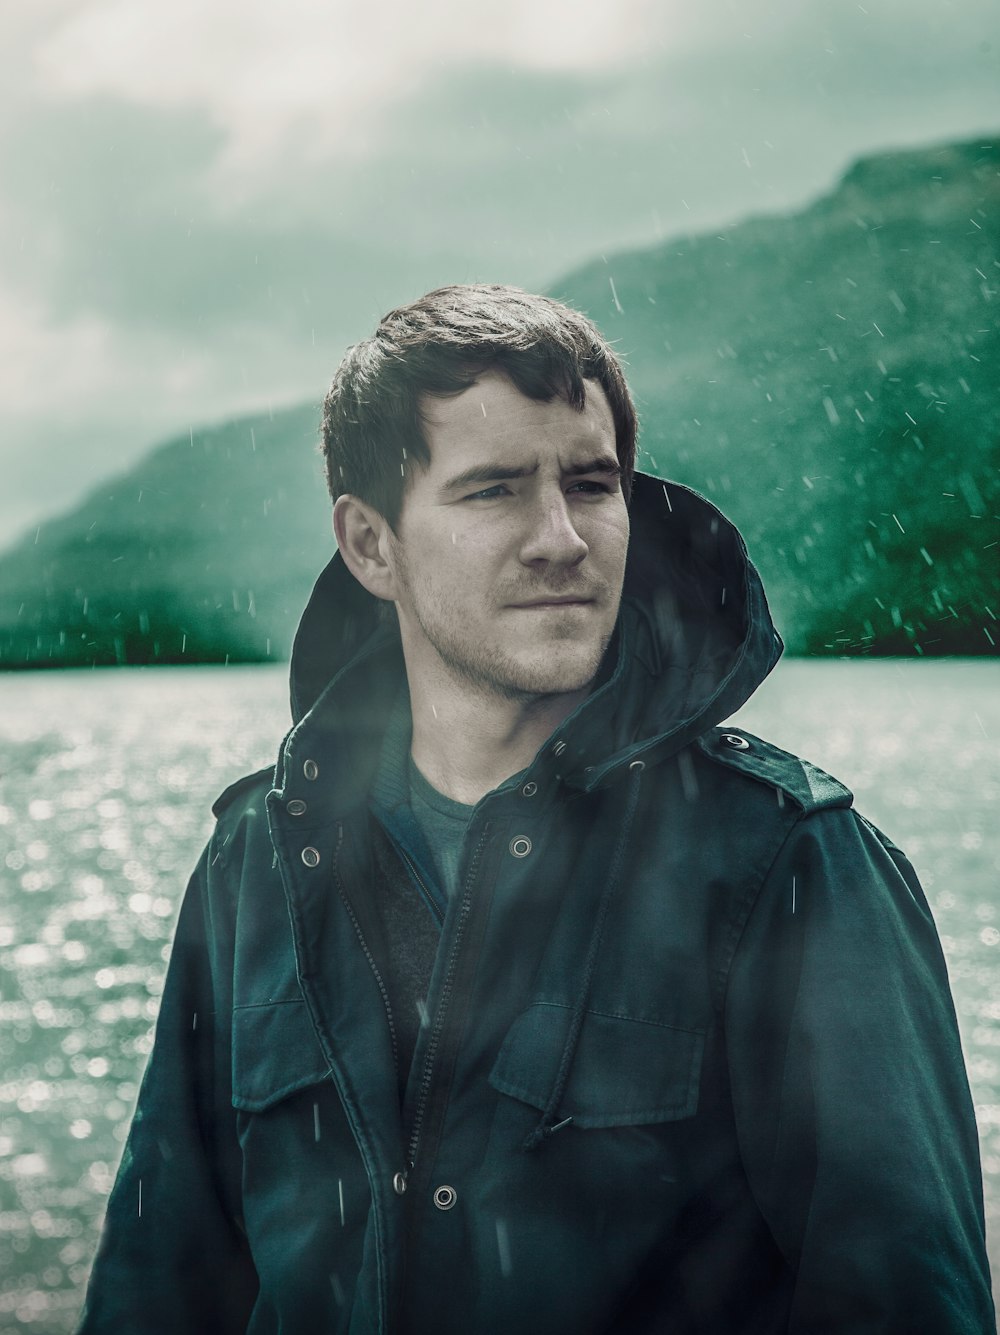 man wearing black zip-up jacket standing near body of water in rainy day